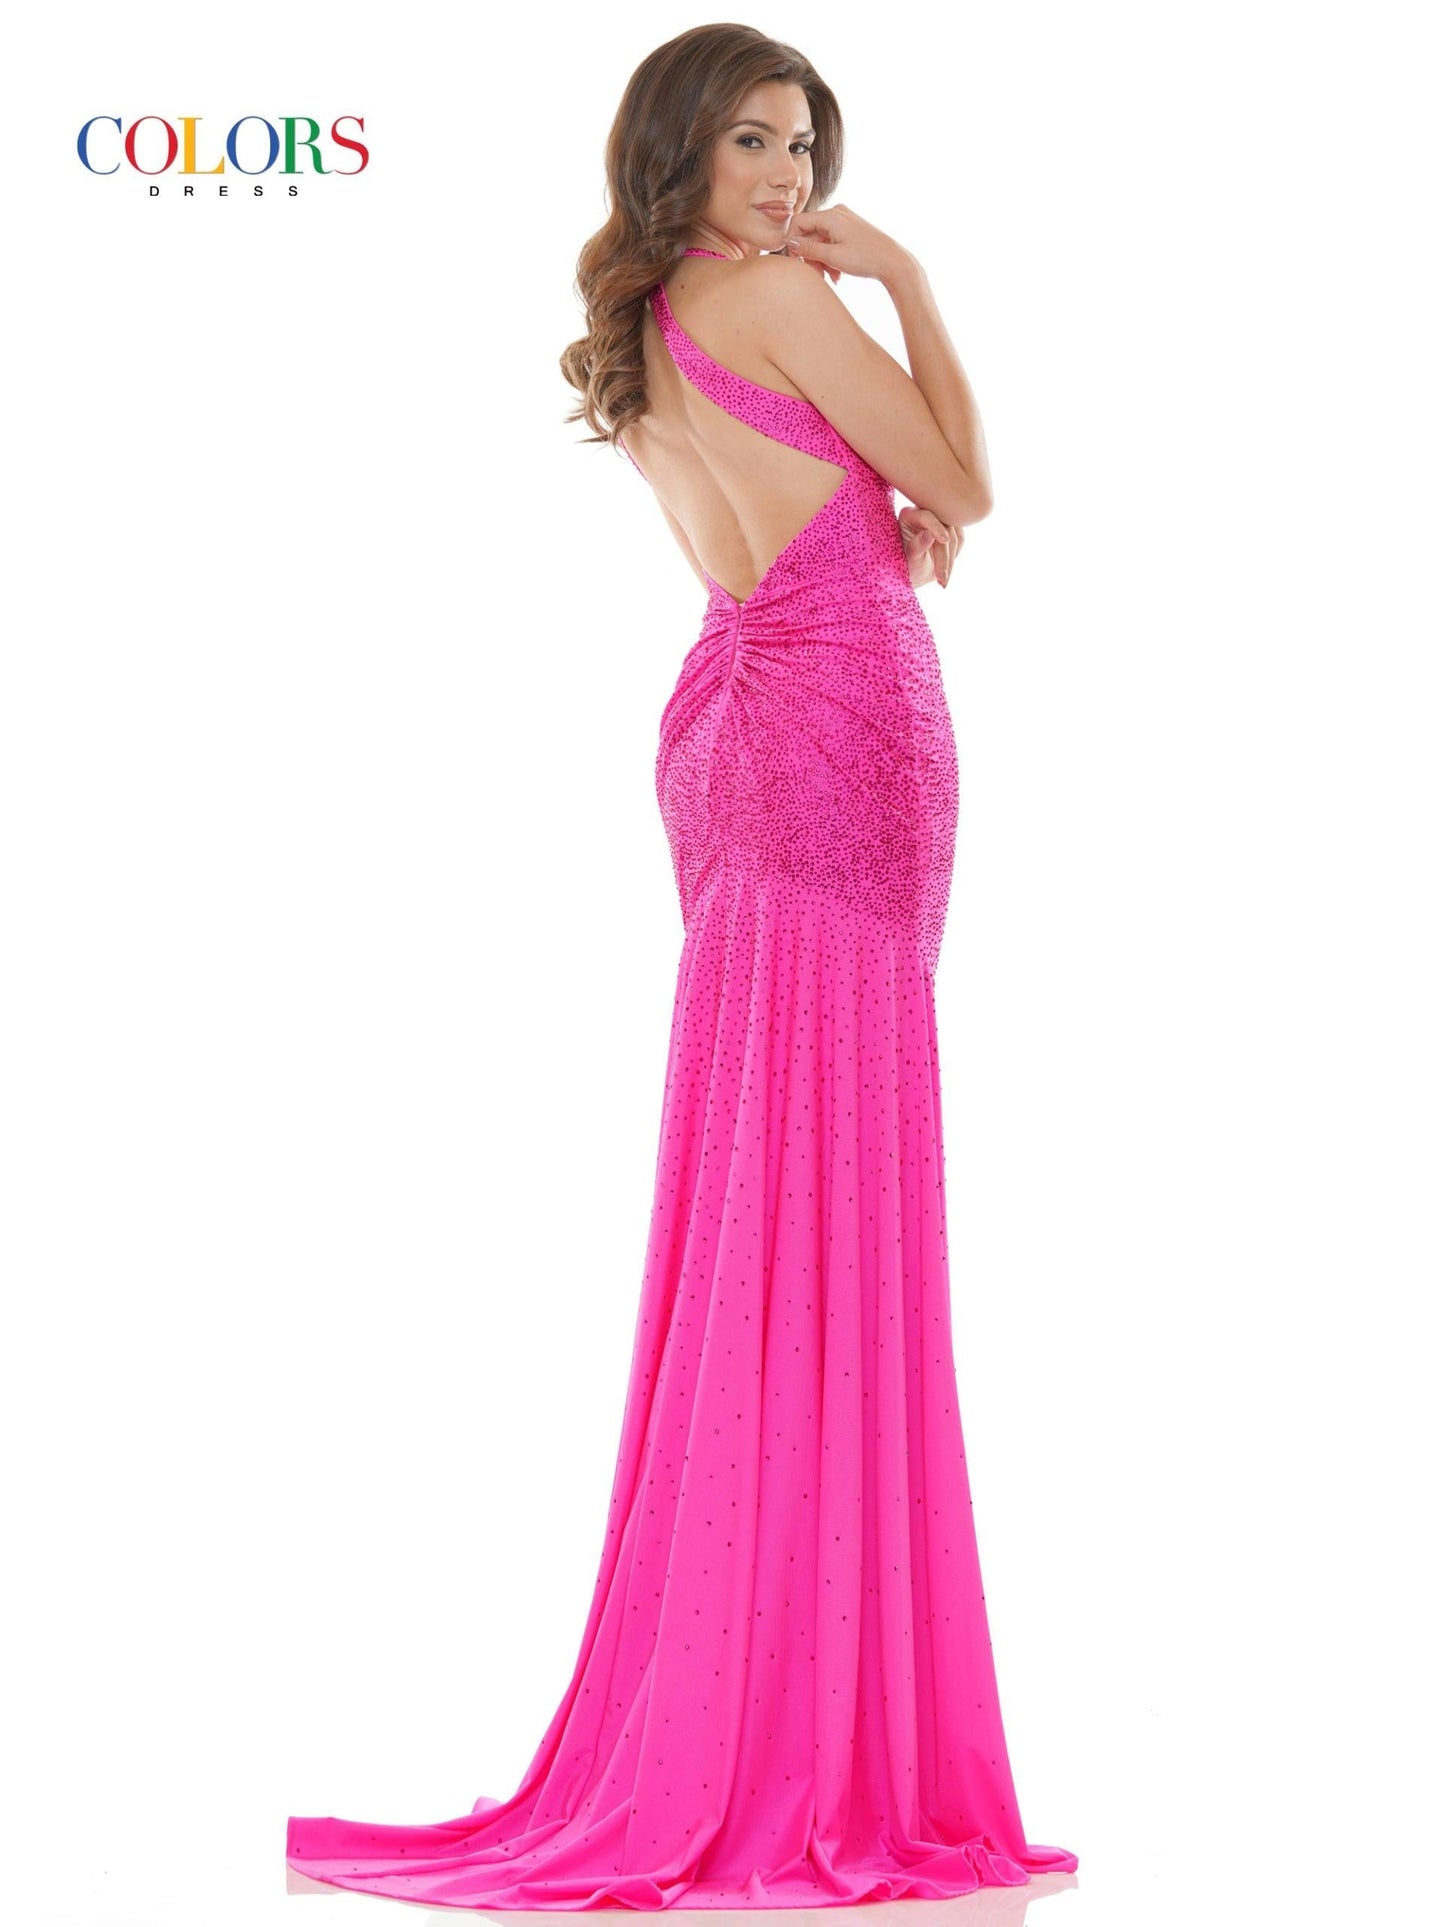 Colors Long Formal Beaded Halter Prom Dress 2658 - The Dress Outlet